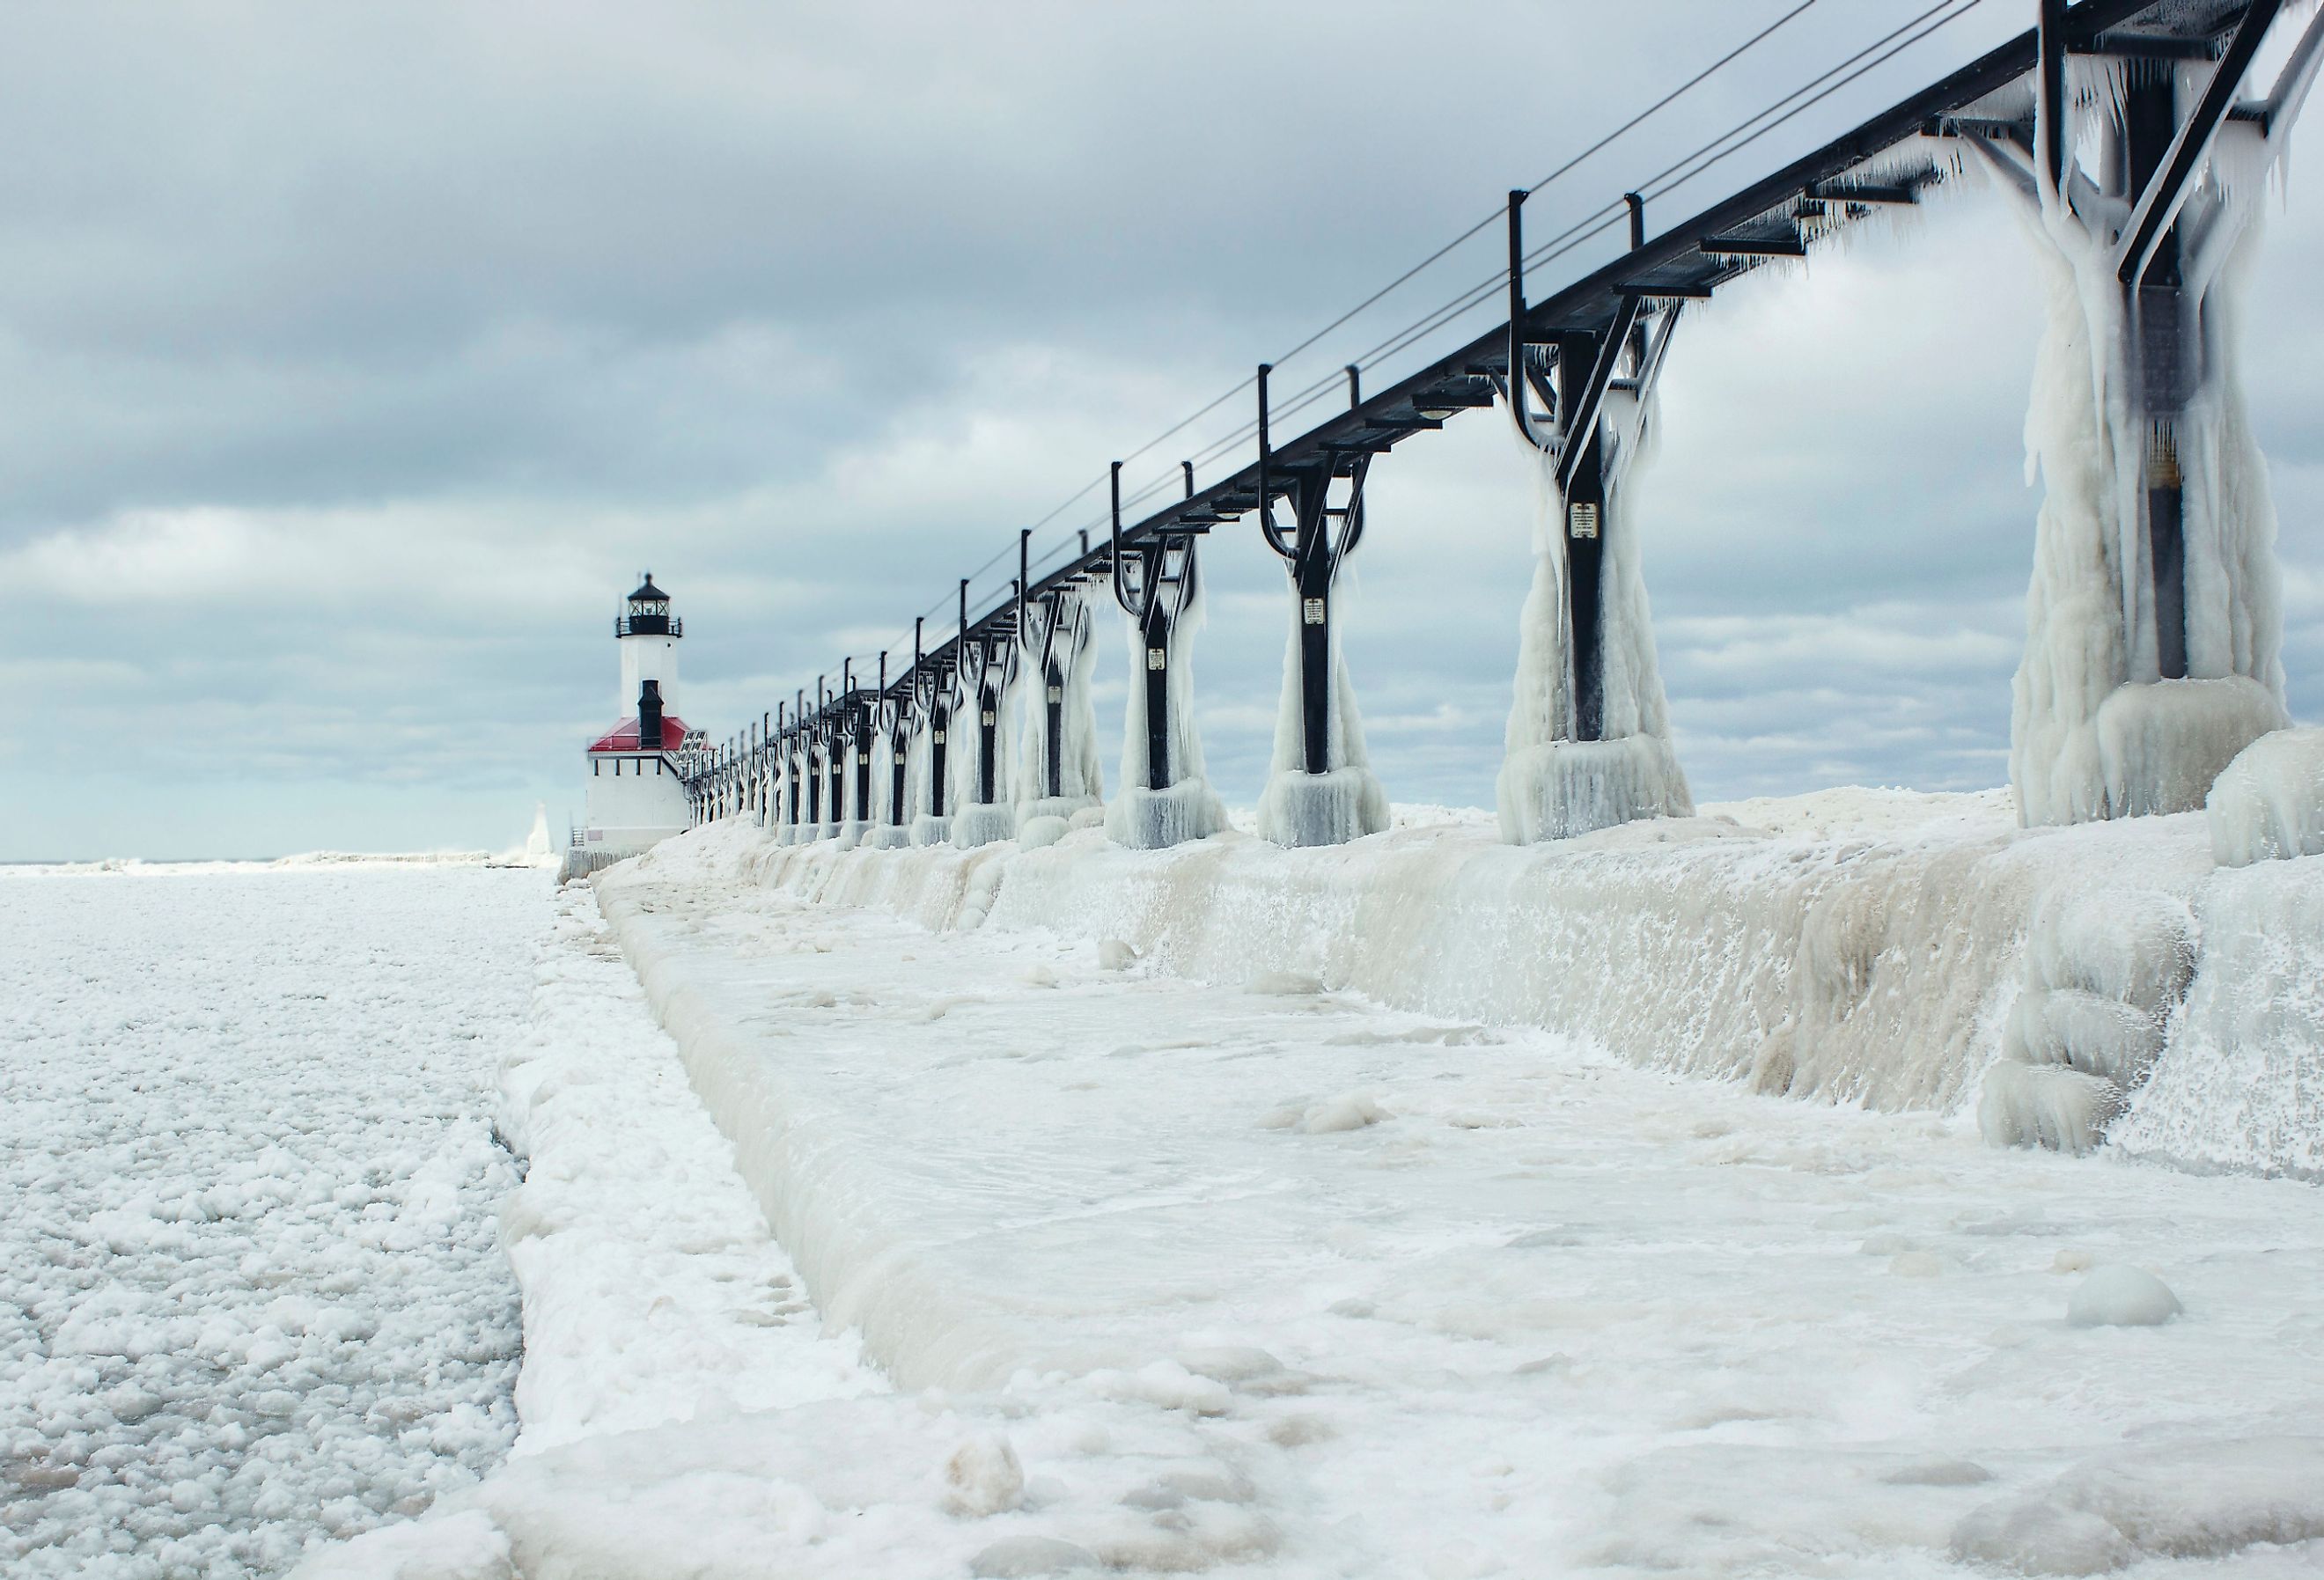  Michigan City, Indiana lighthouse surrounded by frozen Lake Michigan. Image credit Tammy Chesney via Shutterstock.